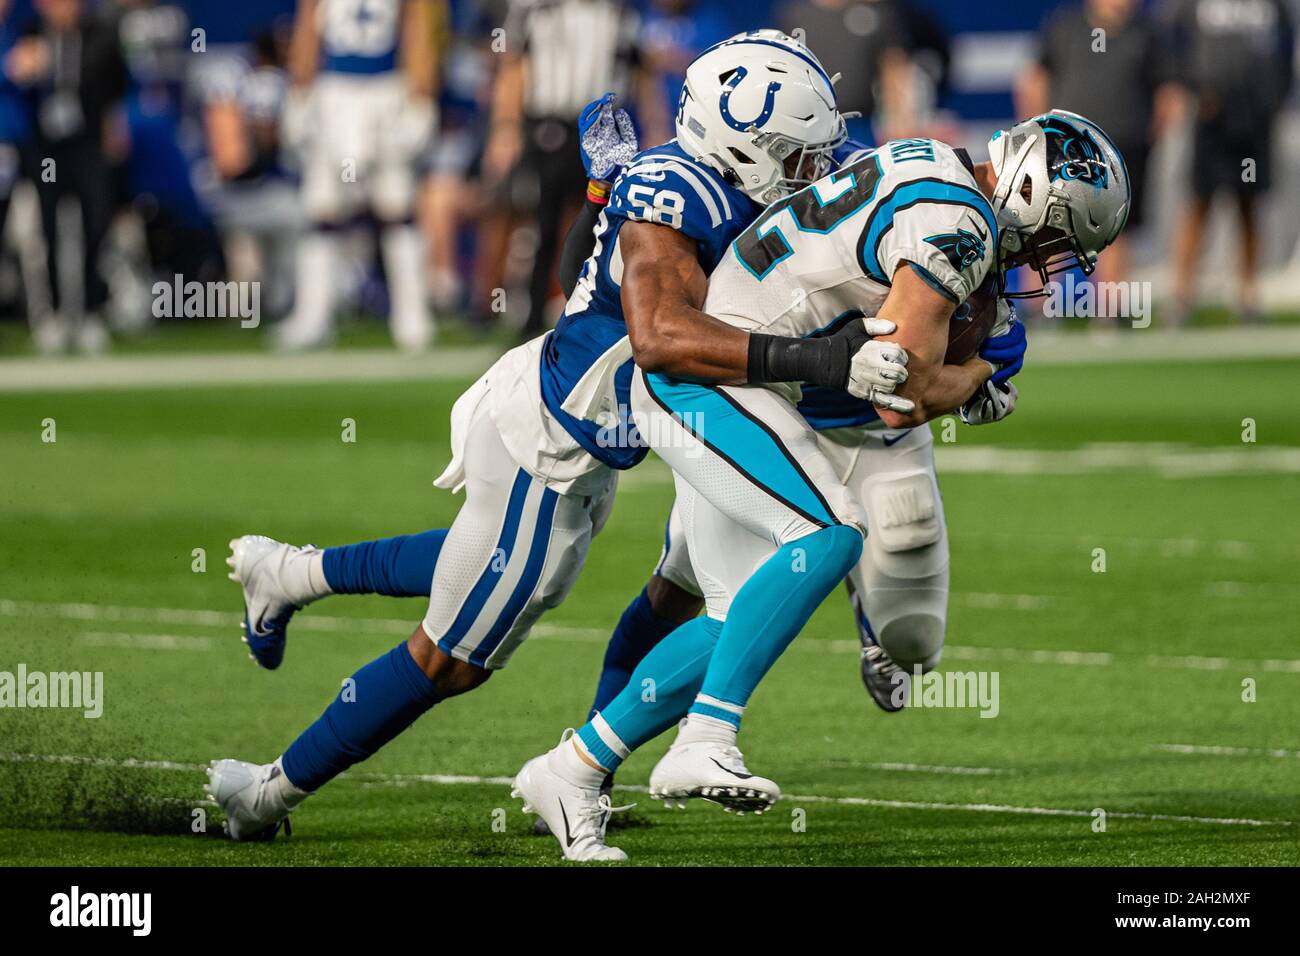 Indianapolis, Indiana, USA. 22nd Dec, 2019. Carolina Panthers running back Christian McCaffrey (22) is tackled by Indianapolis Colts inside linebacker Bobby Okereke (58) in the first half of the game between the Carolina Panthers and the Indianapolis Colts at Lucas Oil Stadium, Indianapolis, Indiana. Credit: Scott Stuart/ZUMA Wire/Alamy Live News Stock Photo